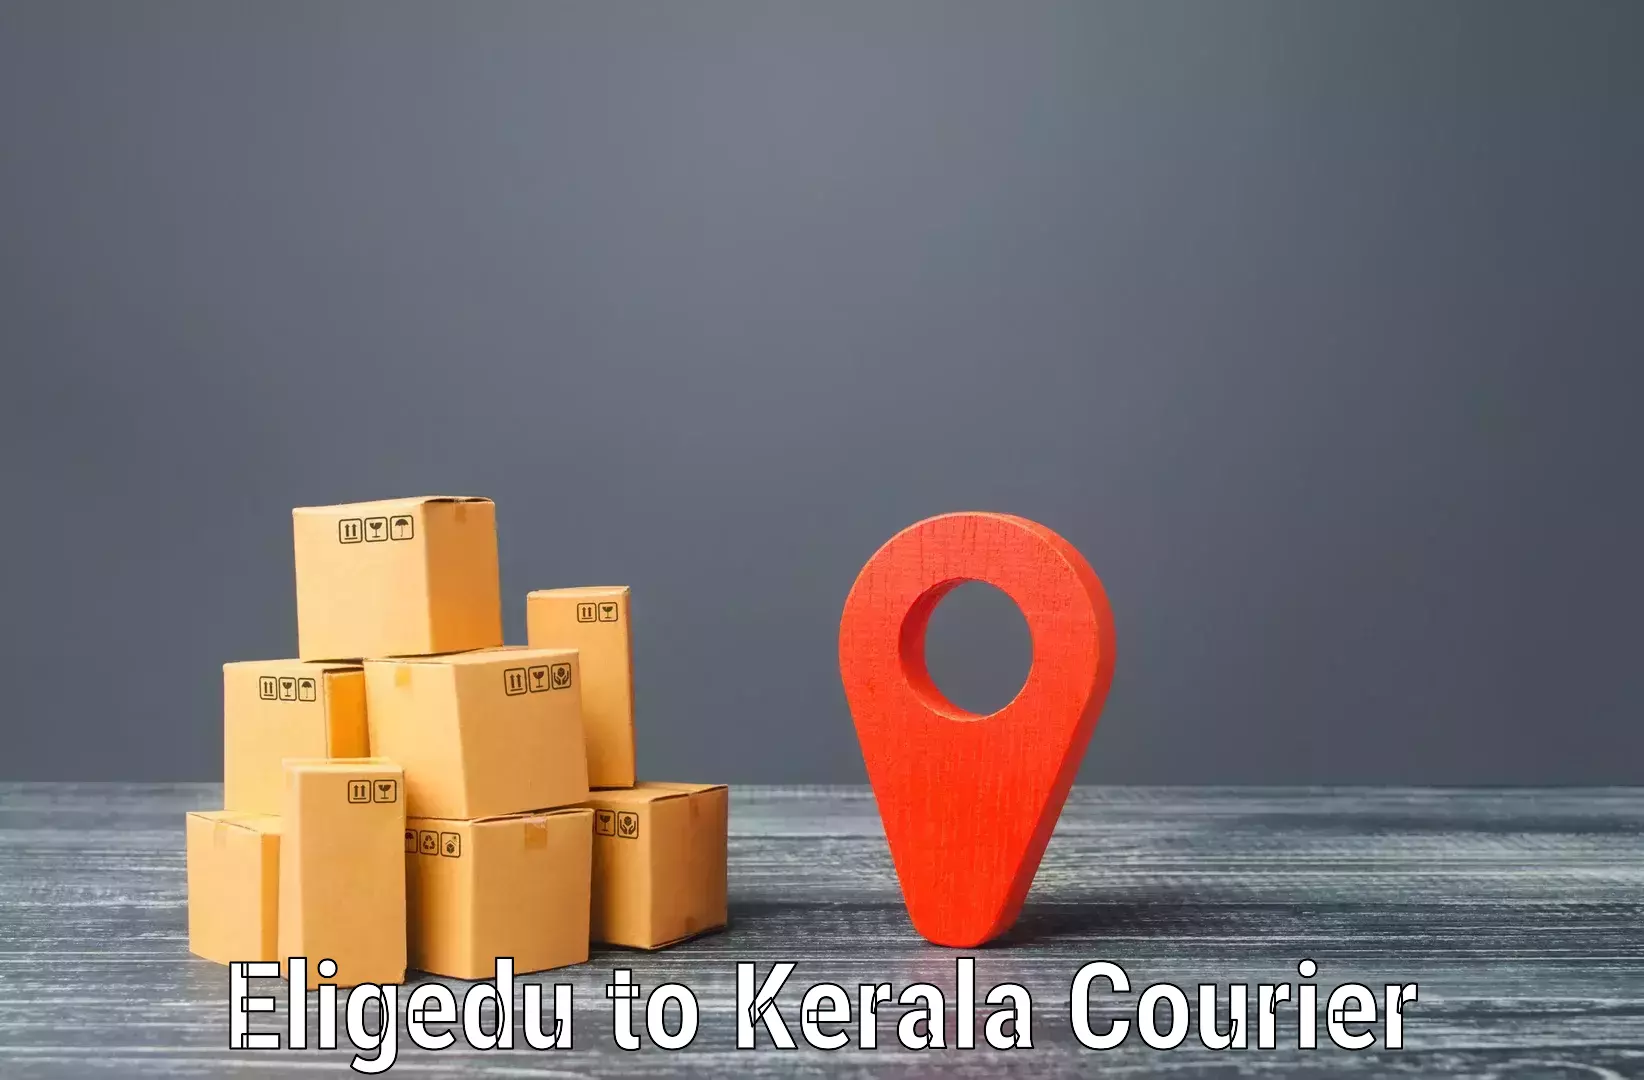 Emergency parcel delivery in Eligedu to Edavanna